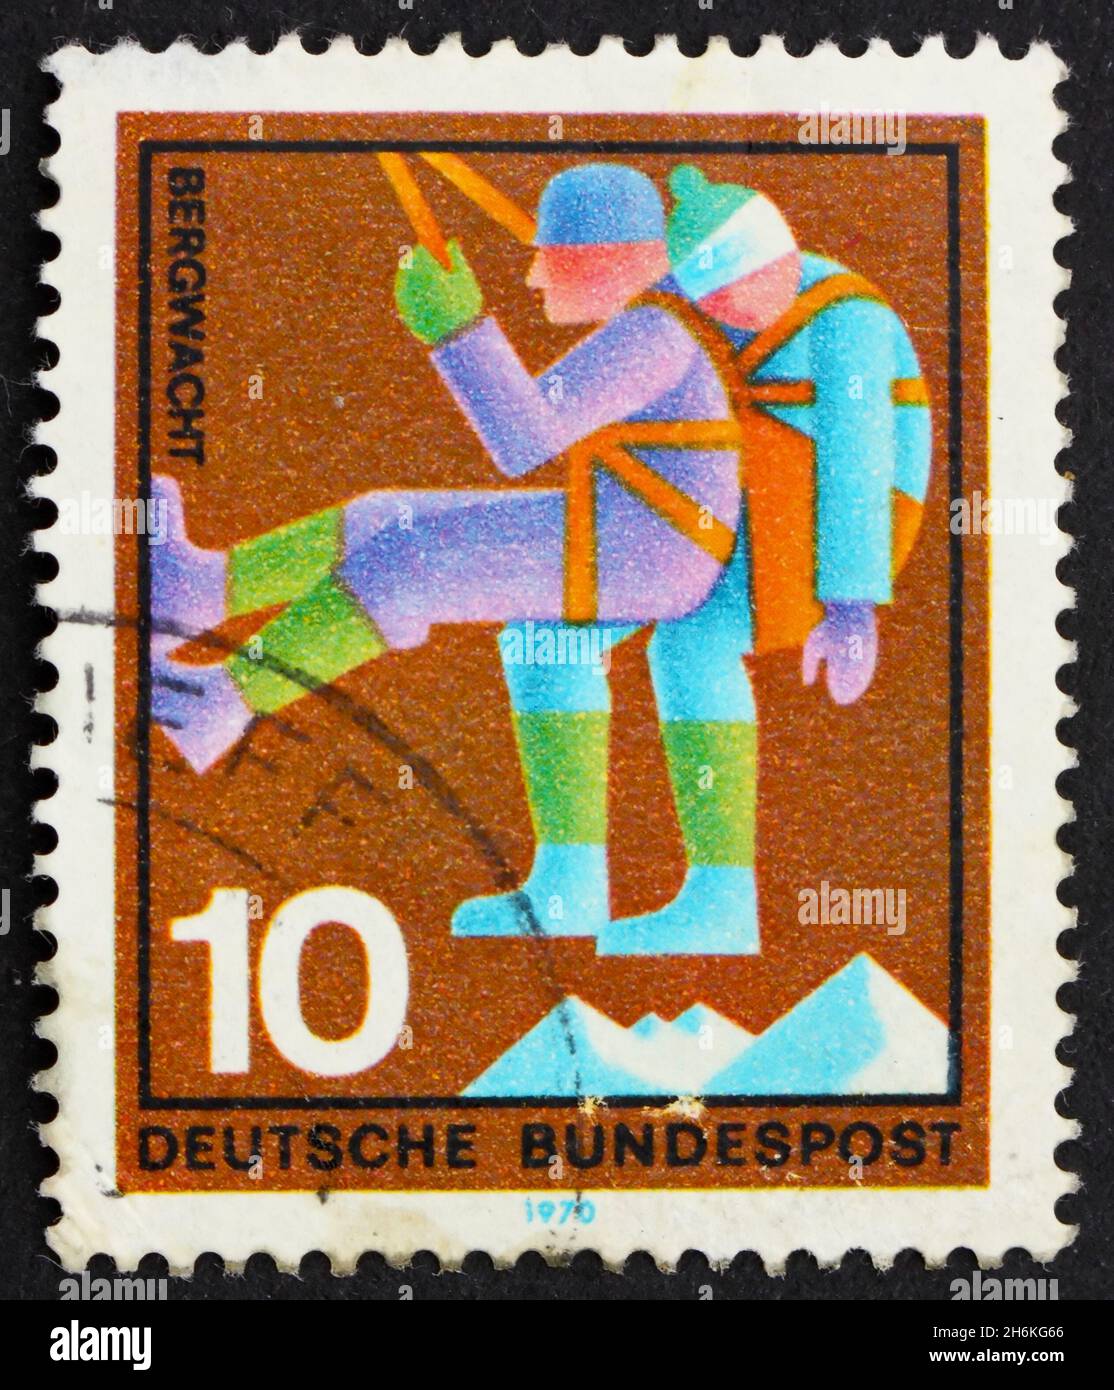 GERMANY - CIRCA 1970: a stamp printed in the Germany shows Mountain Climber, rescuer bringing down casualty, honoring various voluntary services, circ Stock Photo